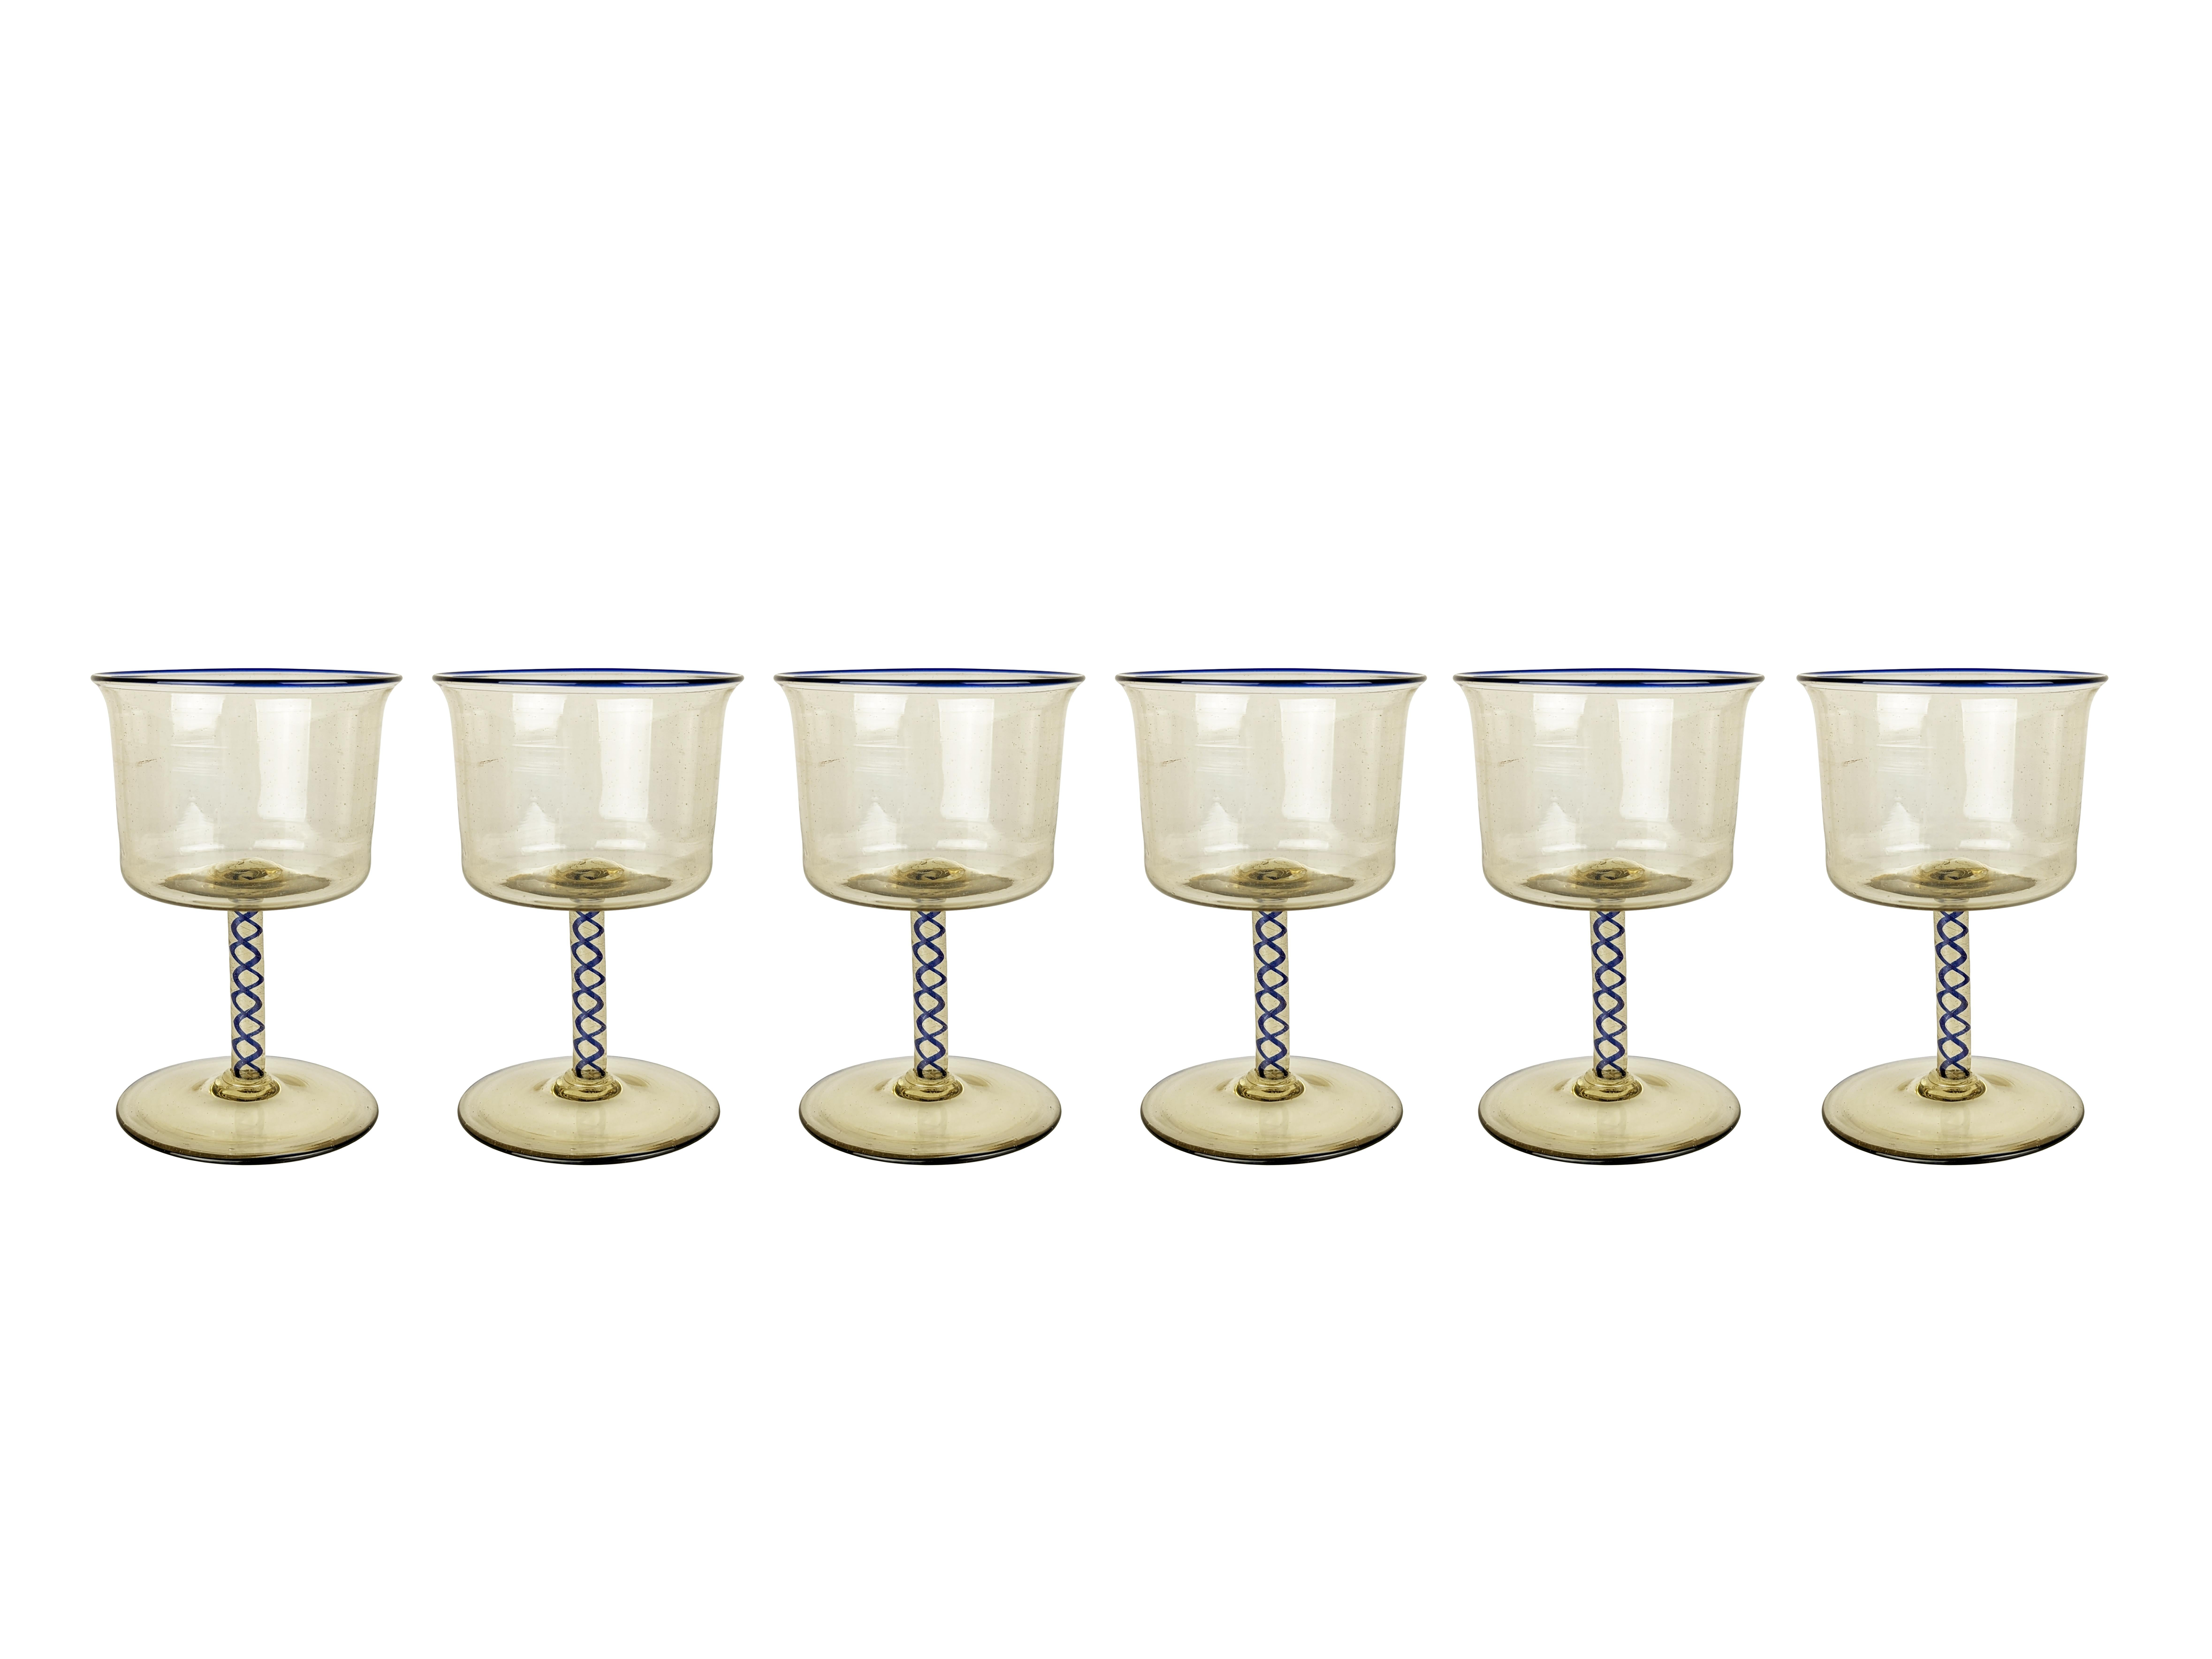 rare set of 18 Murano glass goblets by Vittorio Zecchin for Pauly & Co, 1930s For Sale 2